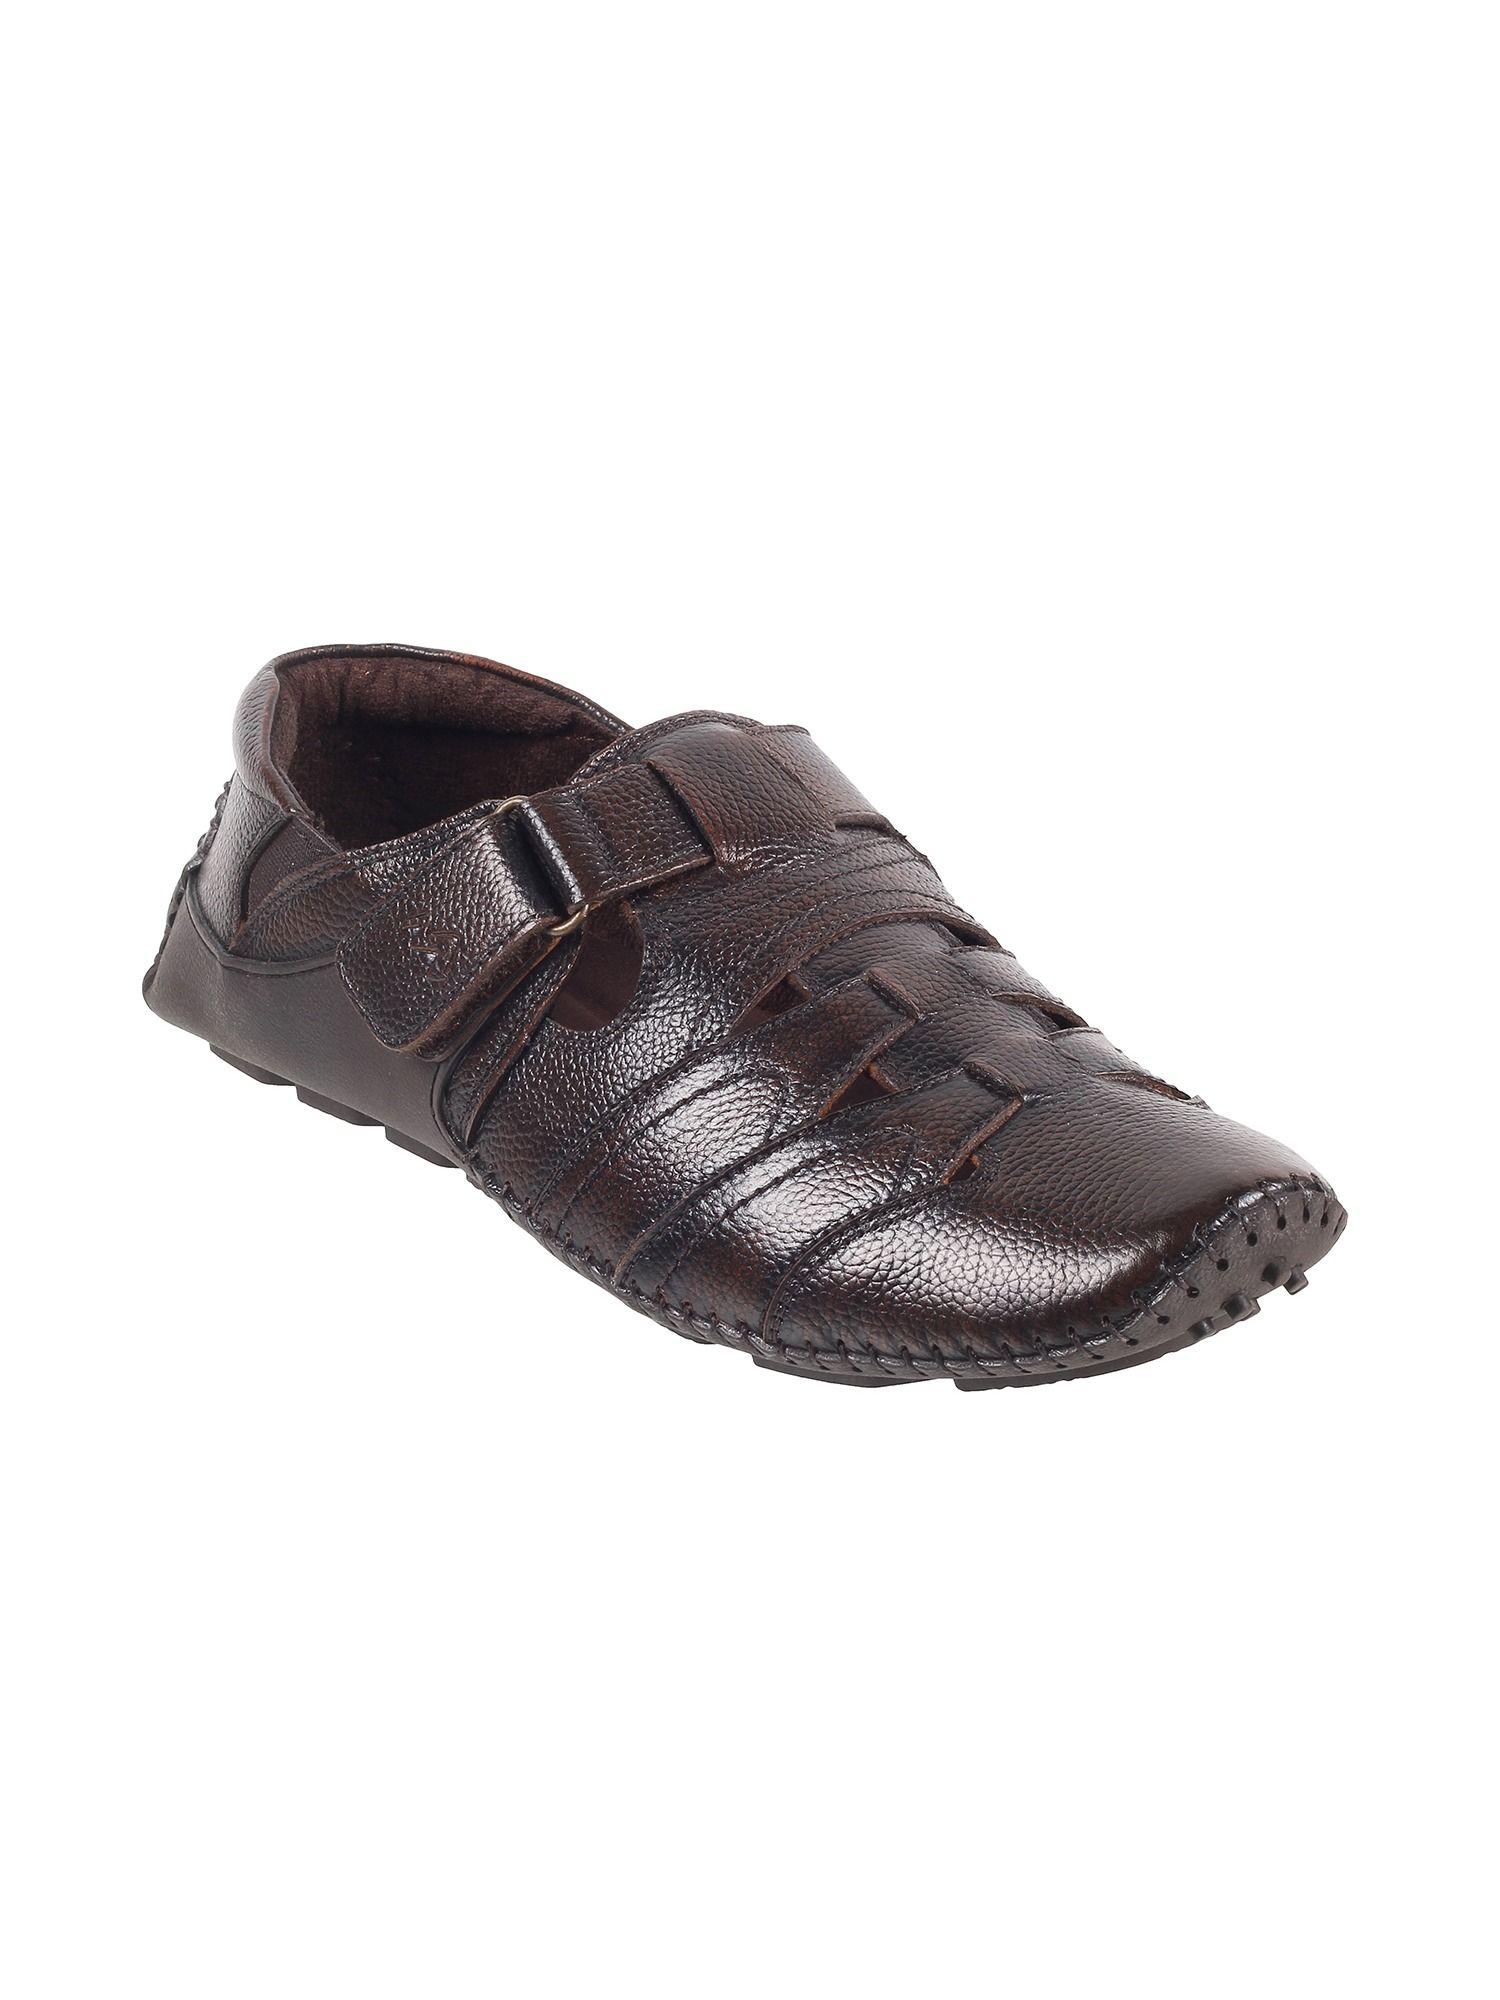 mens-brown-flat-casual-sandalsmetro-brown-solid-sandals